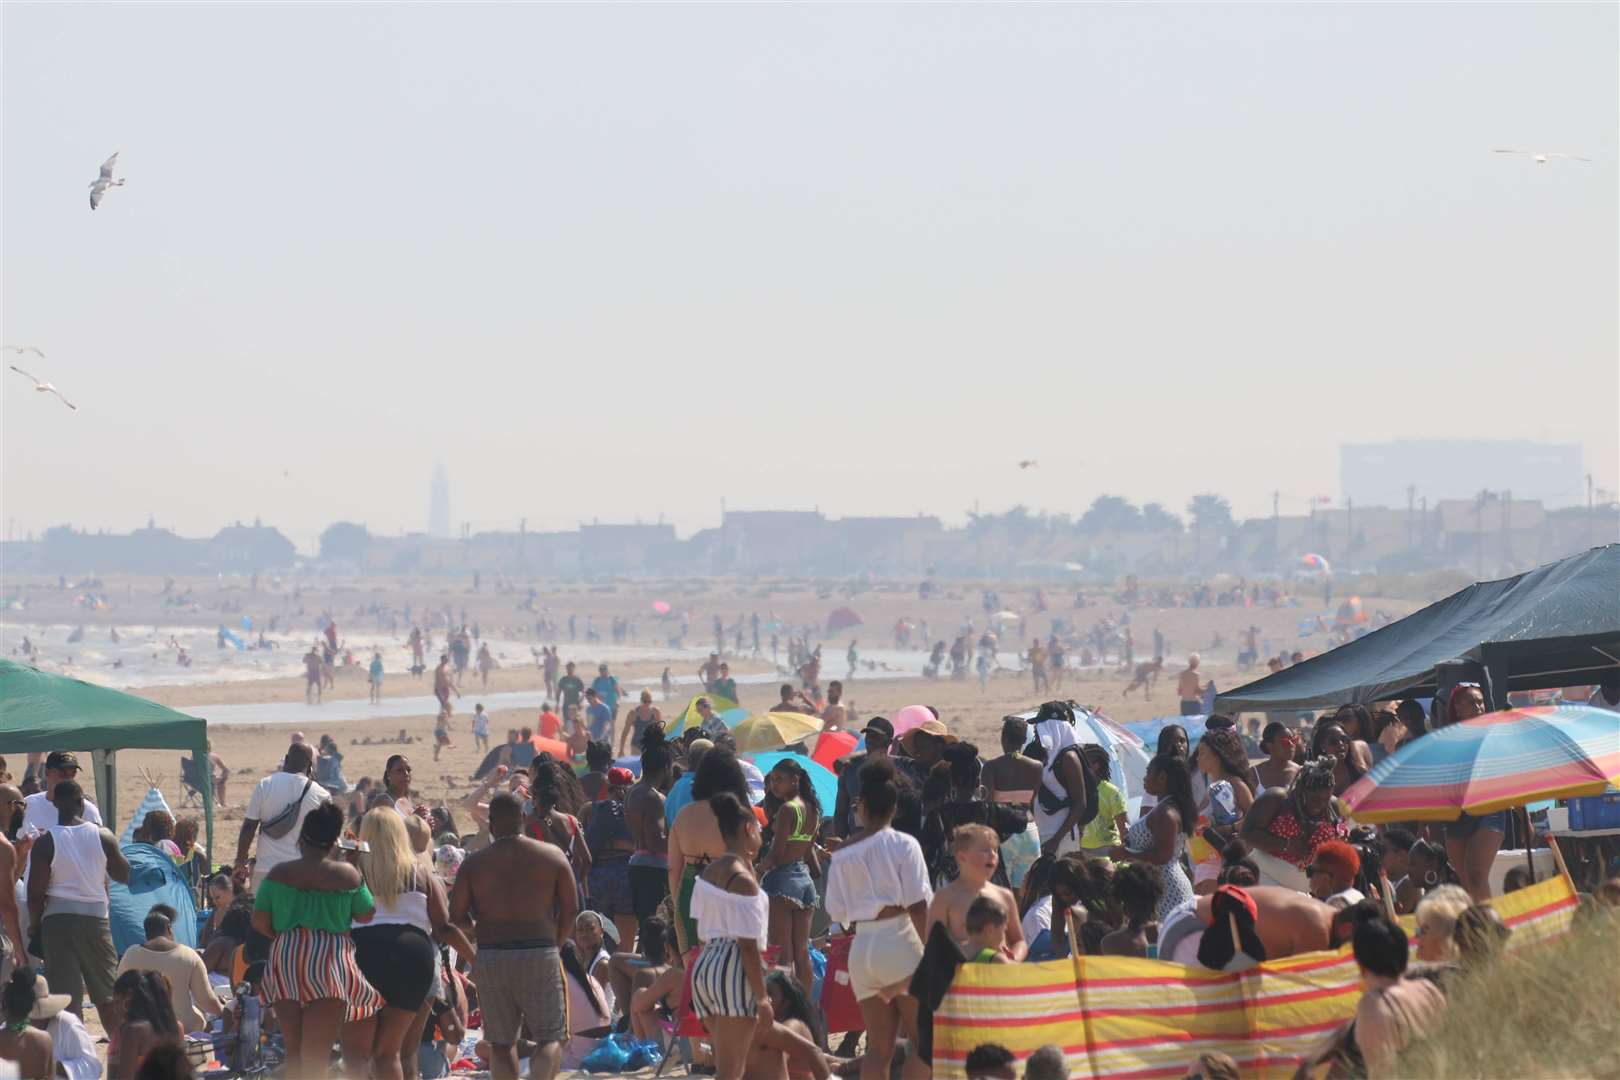 Revellers took to Greatstone Beach as part of a pre-planned 'beach cookout' last month